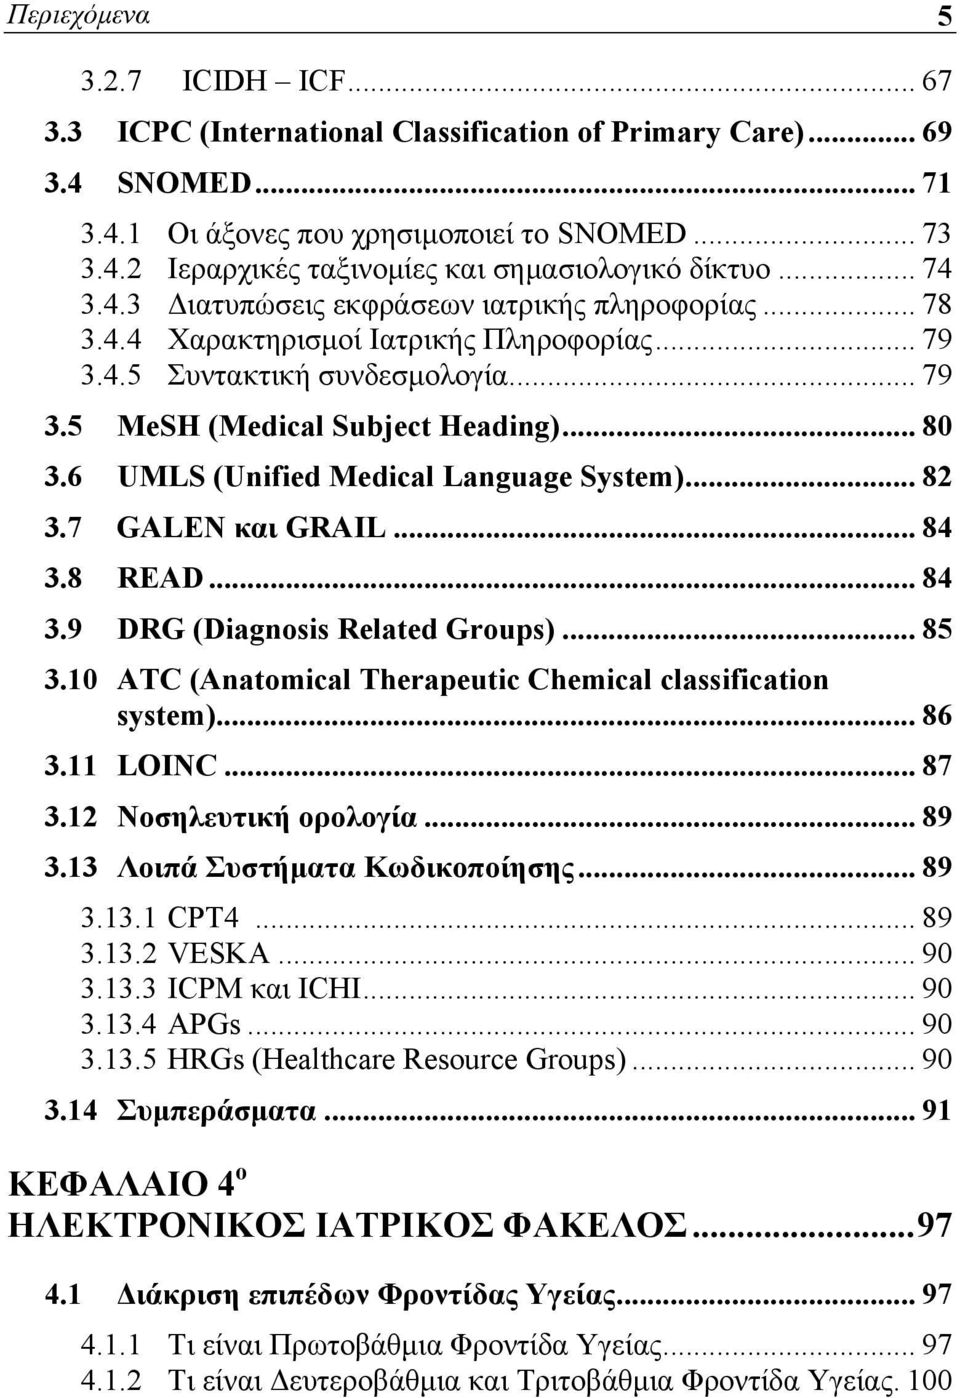 6 UMLS (Unified Medical Language System)... 82 3.7 GALEN και GRAIL... 84 3.8 READ... 84 3.9 DRG (Diagnosis Related Groups)... 85 3.10 ATC (Anatomical Therapeutic Chemical classification system)... 86 3.